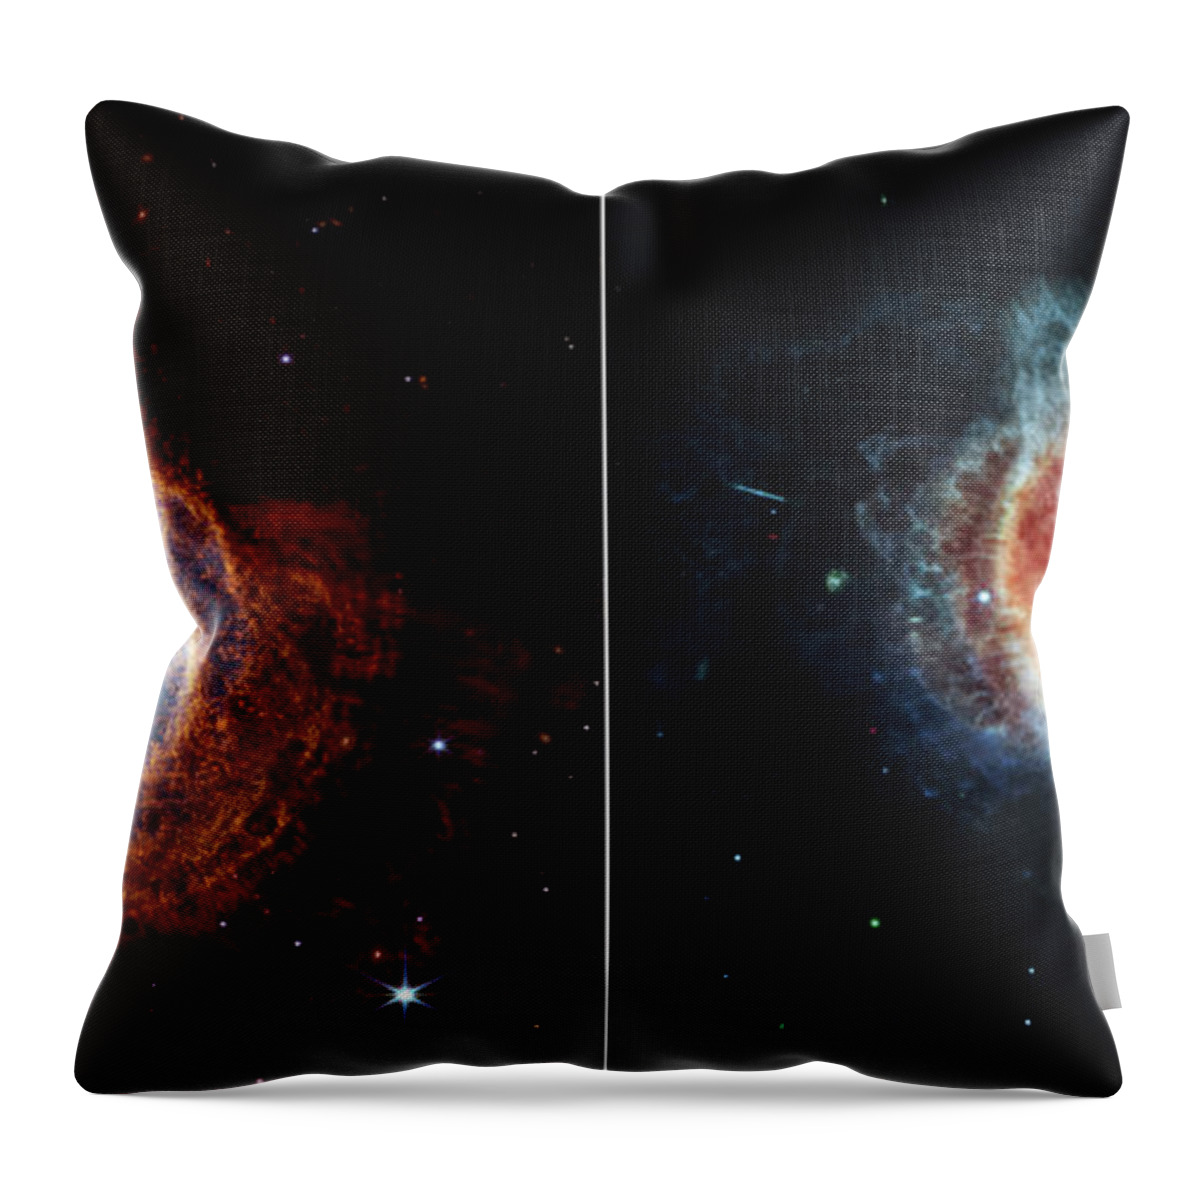 Astronomical Throw Pillow featuring the photograph C056/2349 by Science Photo Library